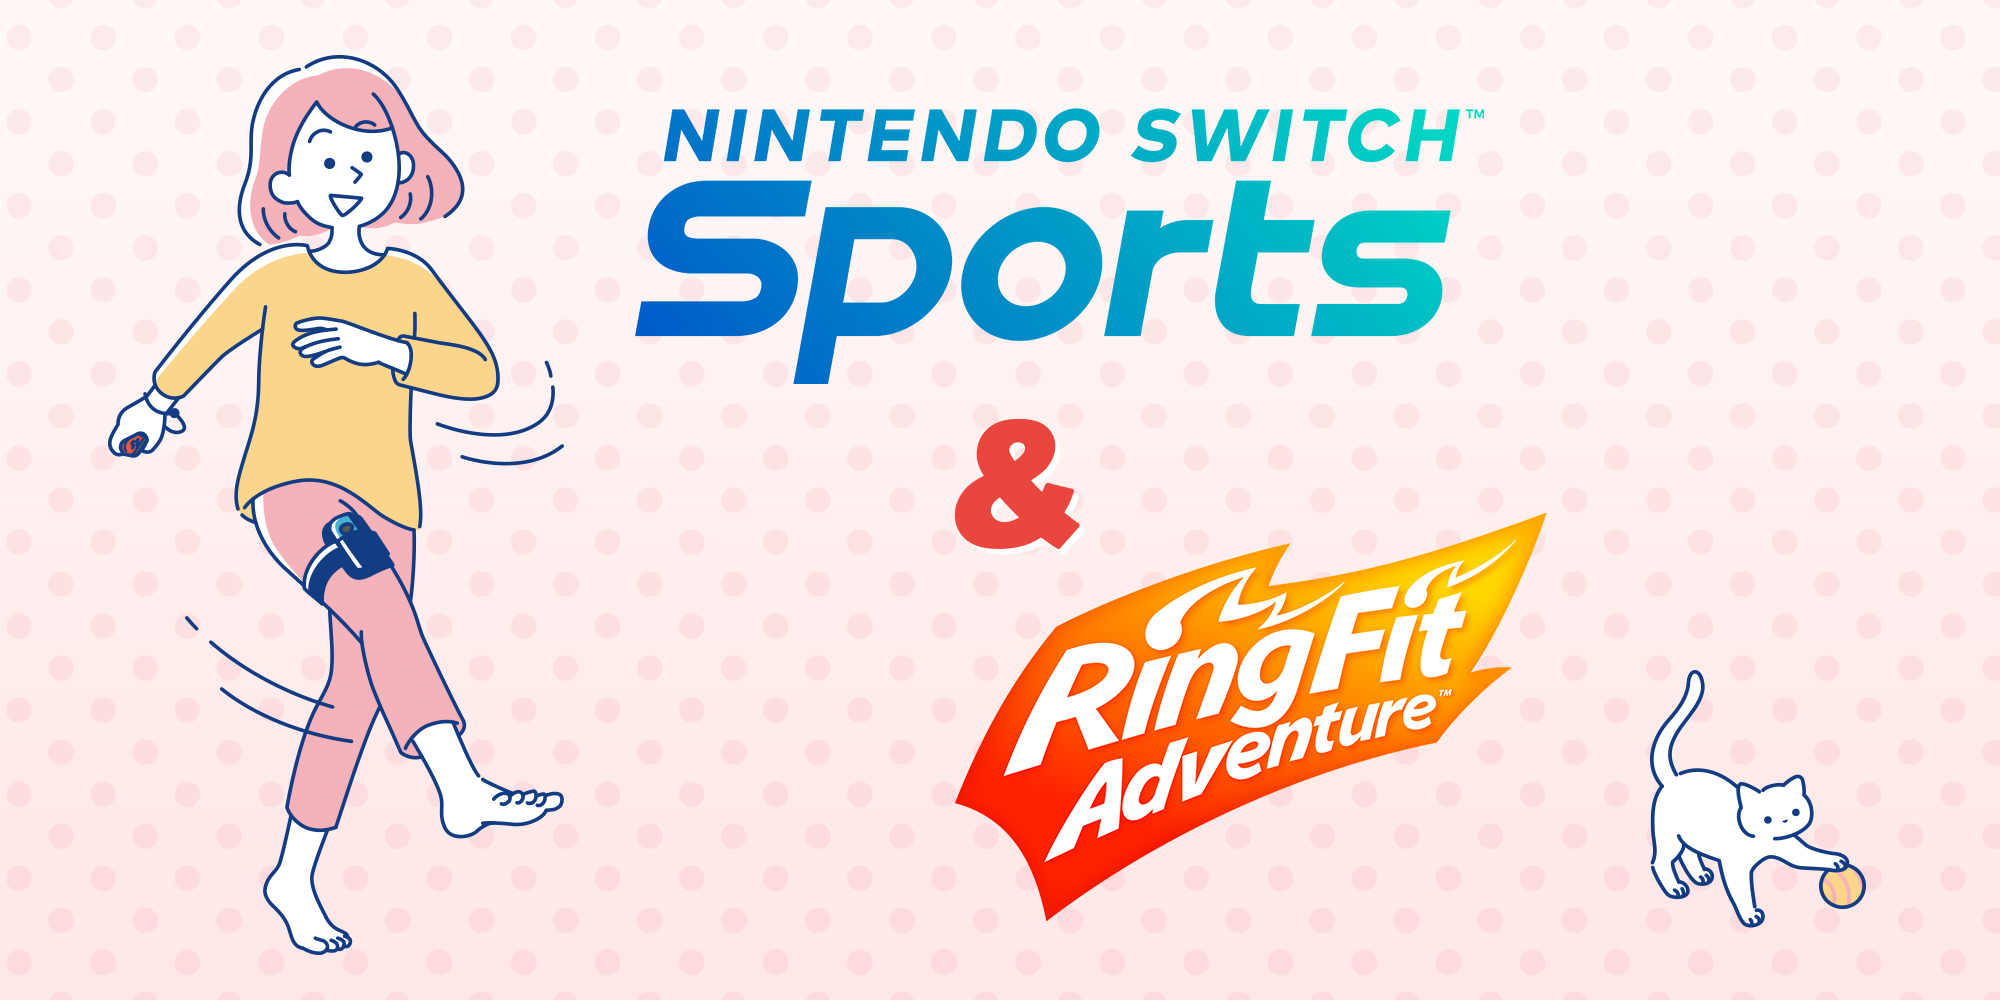 Kick-start the year and get moving with Nintendo Switch Sports and Ring Fit Adventure